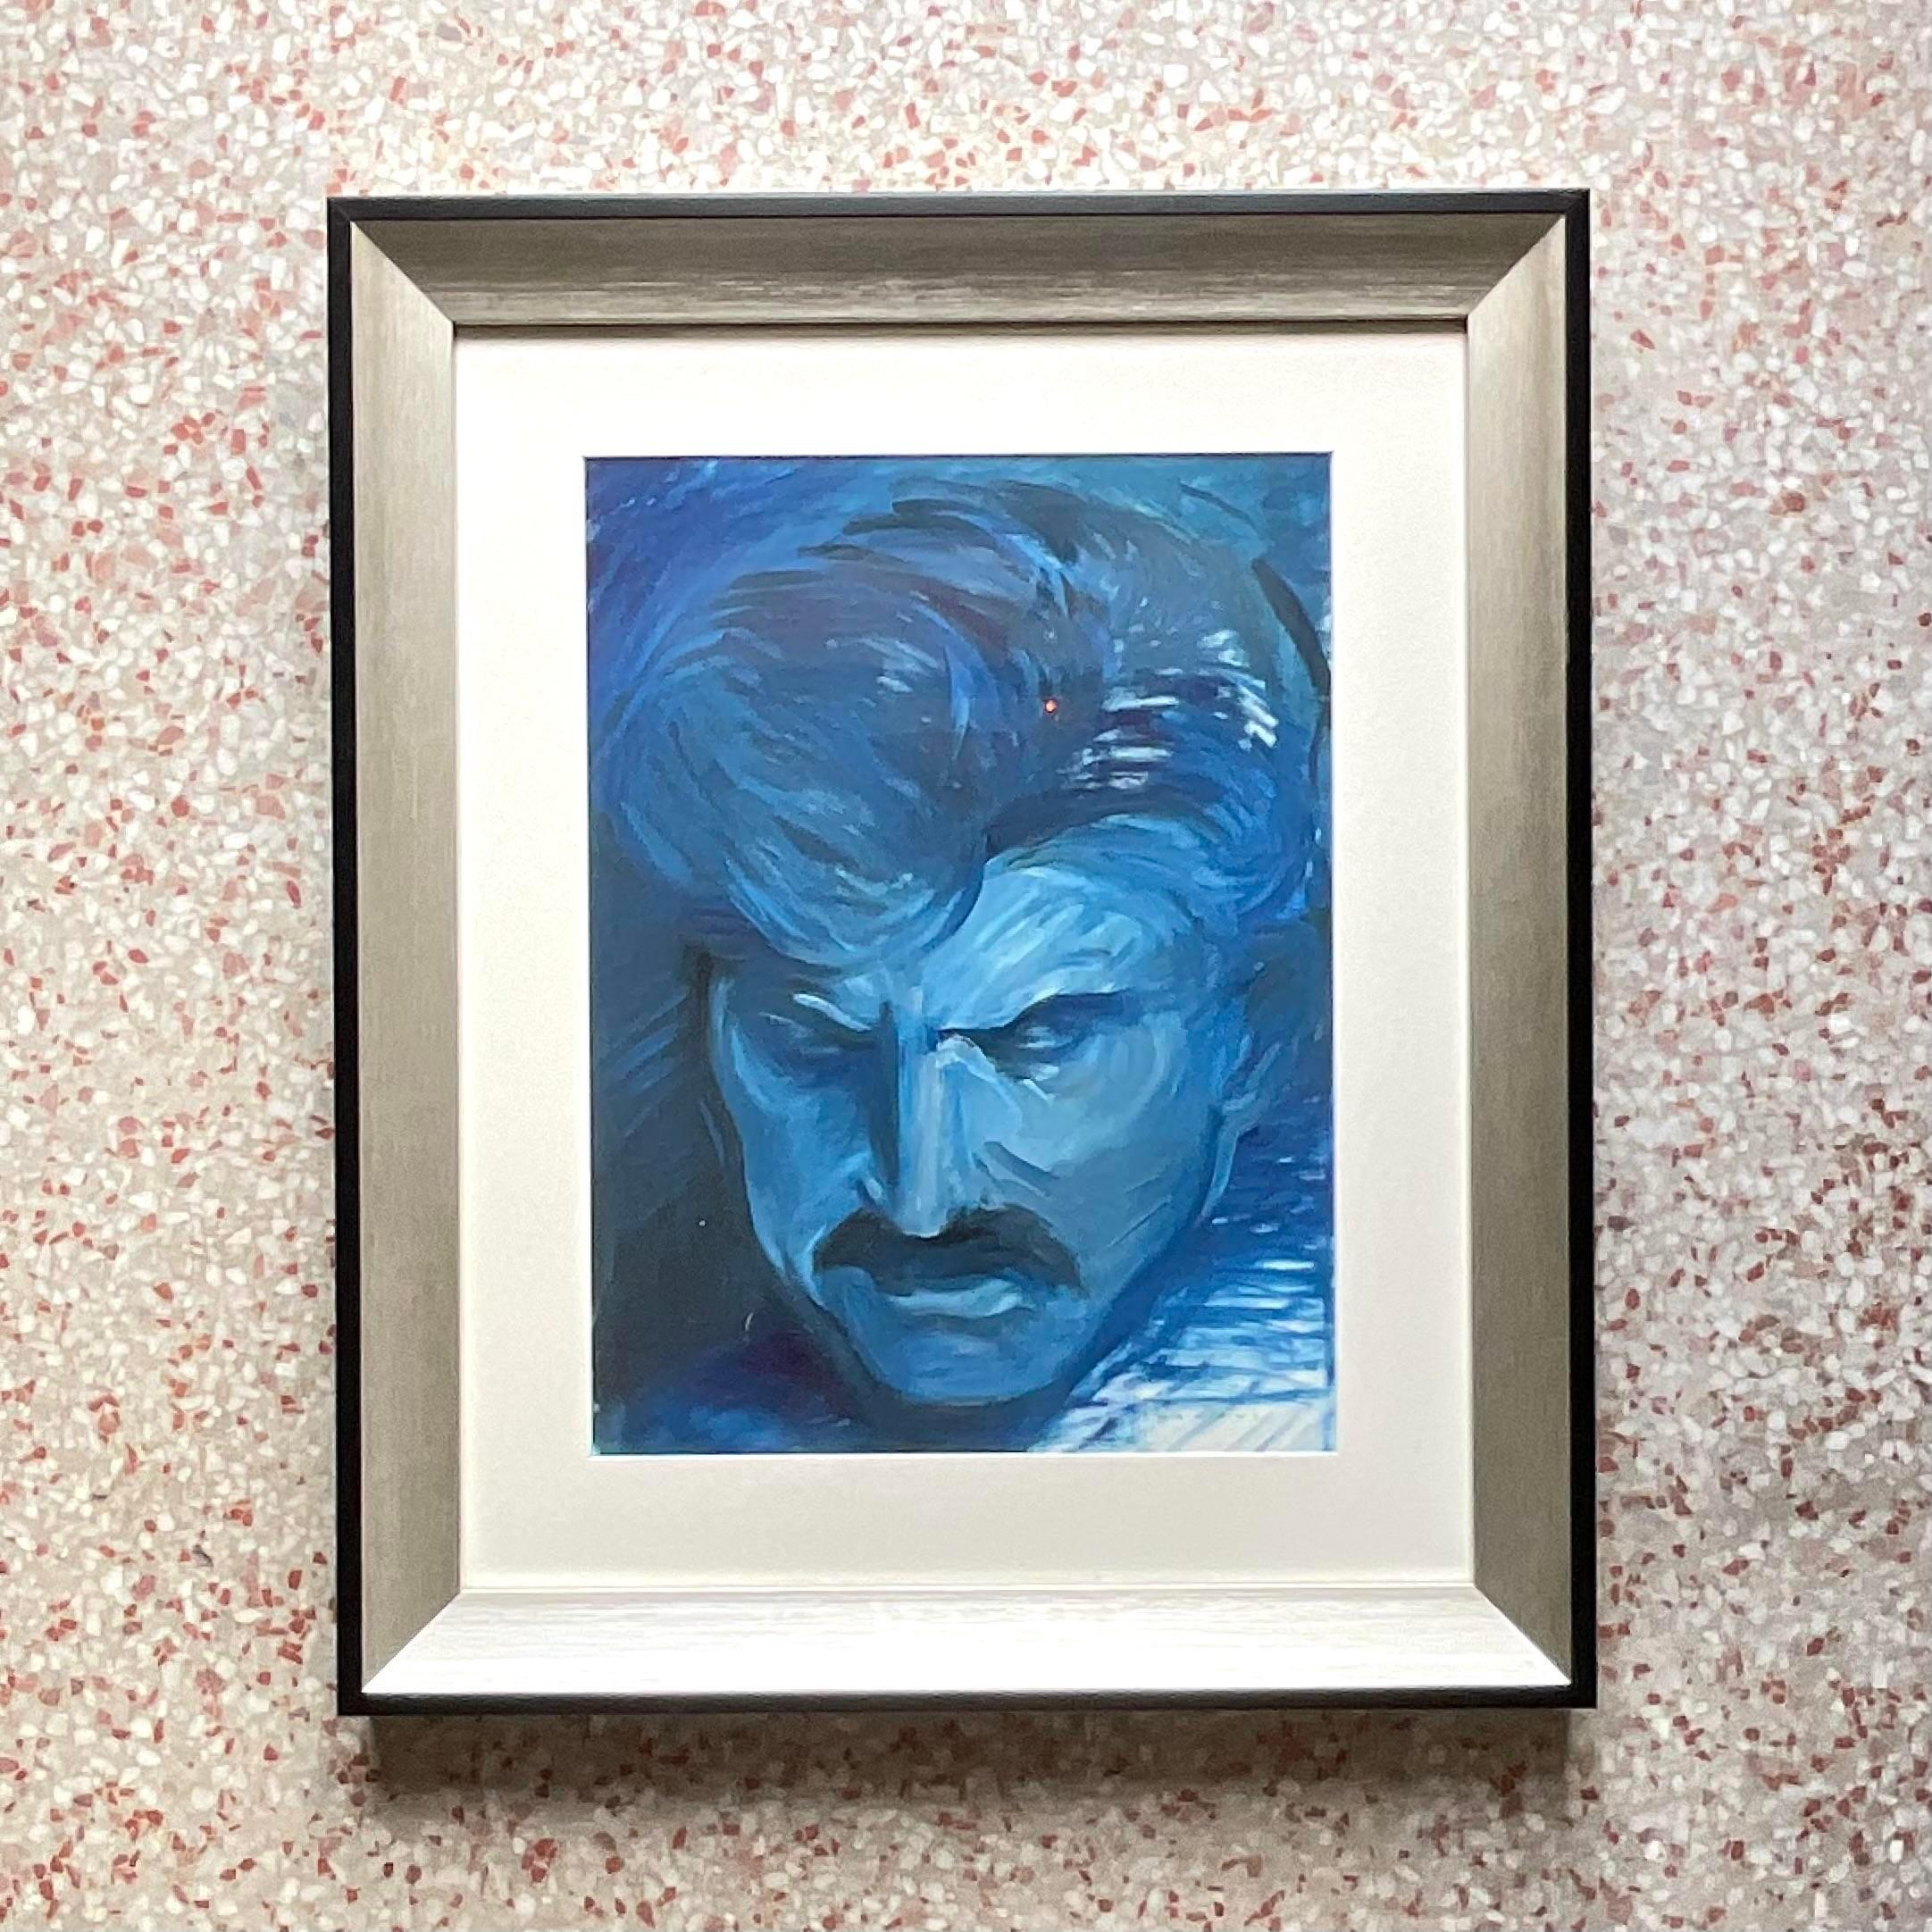 Vintage Boho original oil painting on paper. A fabulous portrait of a man in all shades of blue. Signed by the artist. Acquired from a Palm Beach estate.